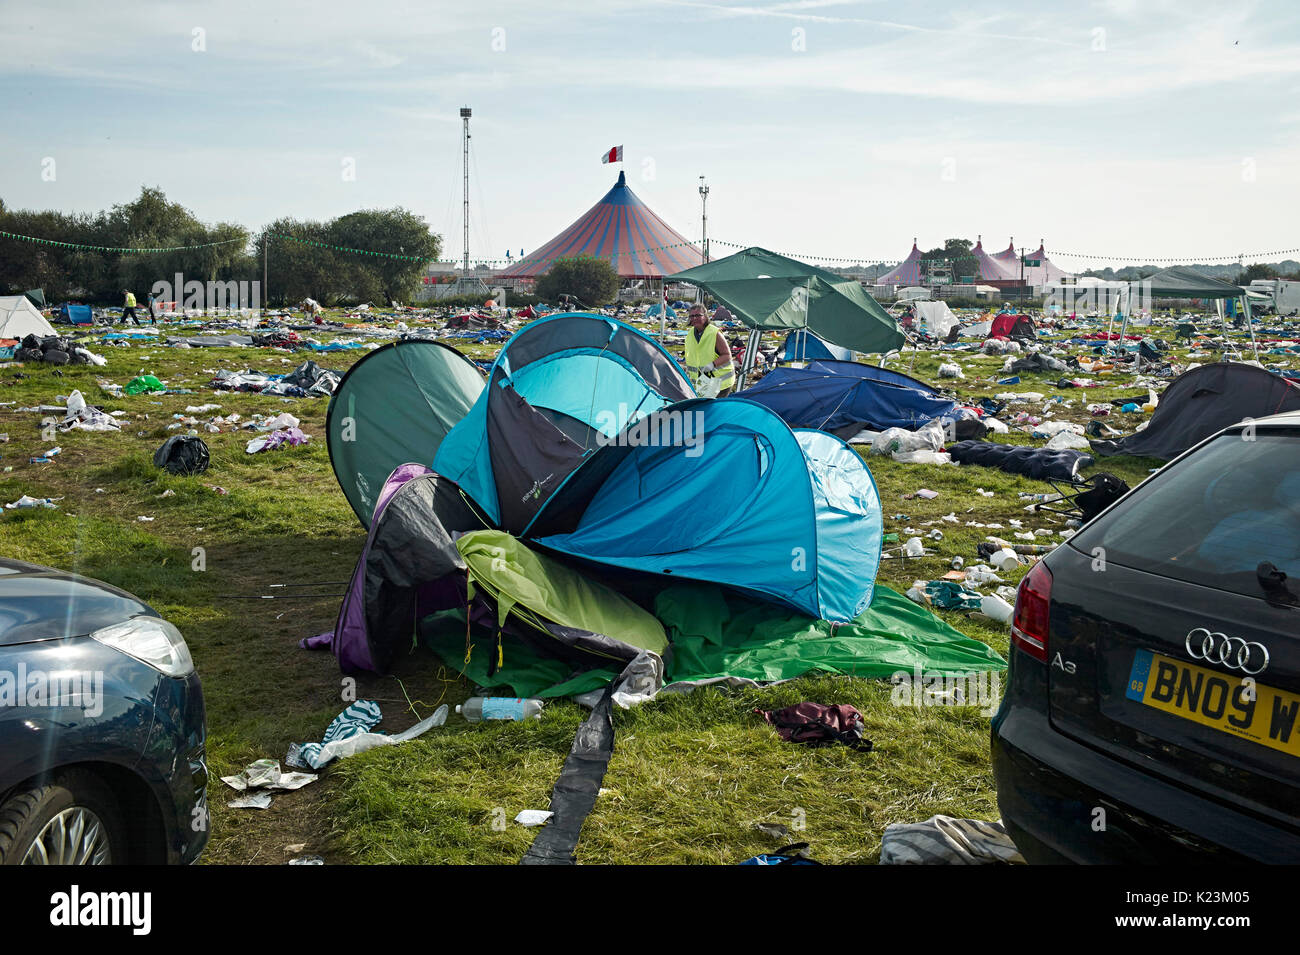 Reading, UK. 28th Aug, 2017.   The aftermath of Reading Festival start the huge clean-up operation begins.Thousands of revellers decided to ditch their tents in the fields following the bank holiday weekend rock festival. Over half a dozen fields where festival-goers camped are now littered with rubbish and abandoned tents. Credit: john angerson/Alamy Live News Stock Photo